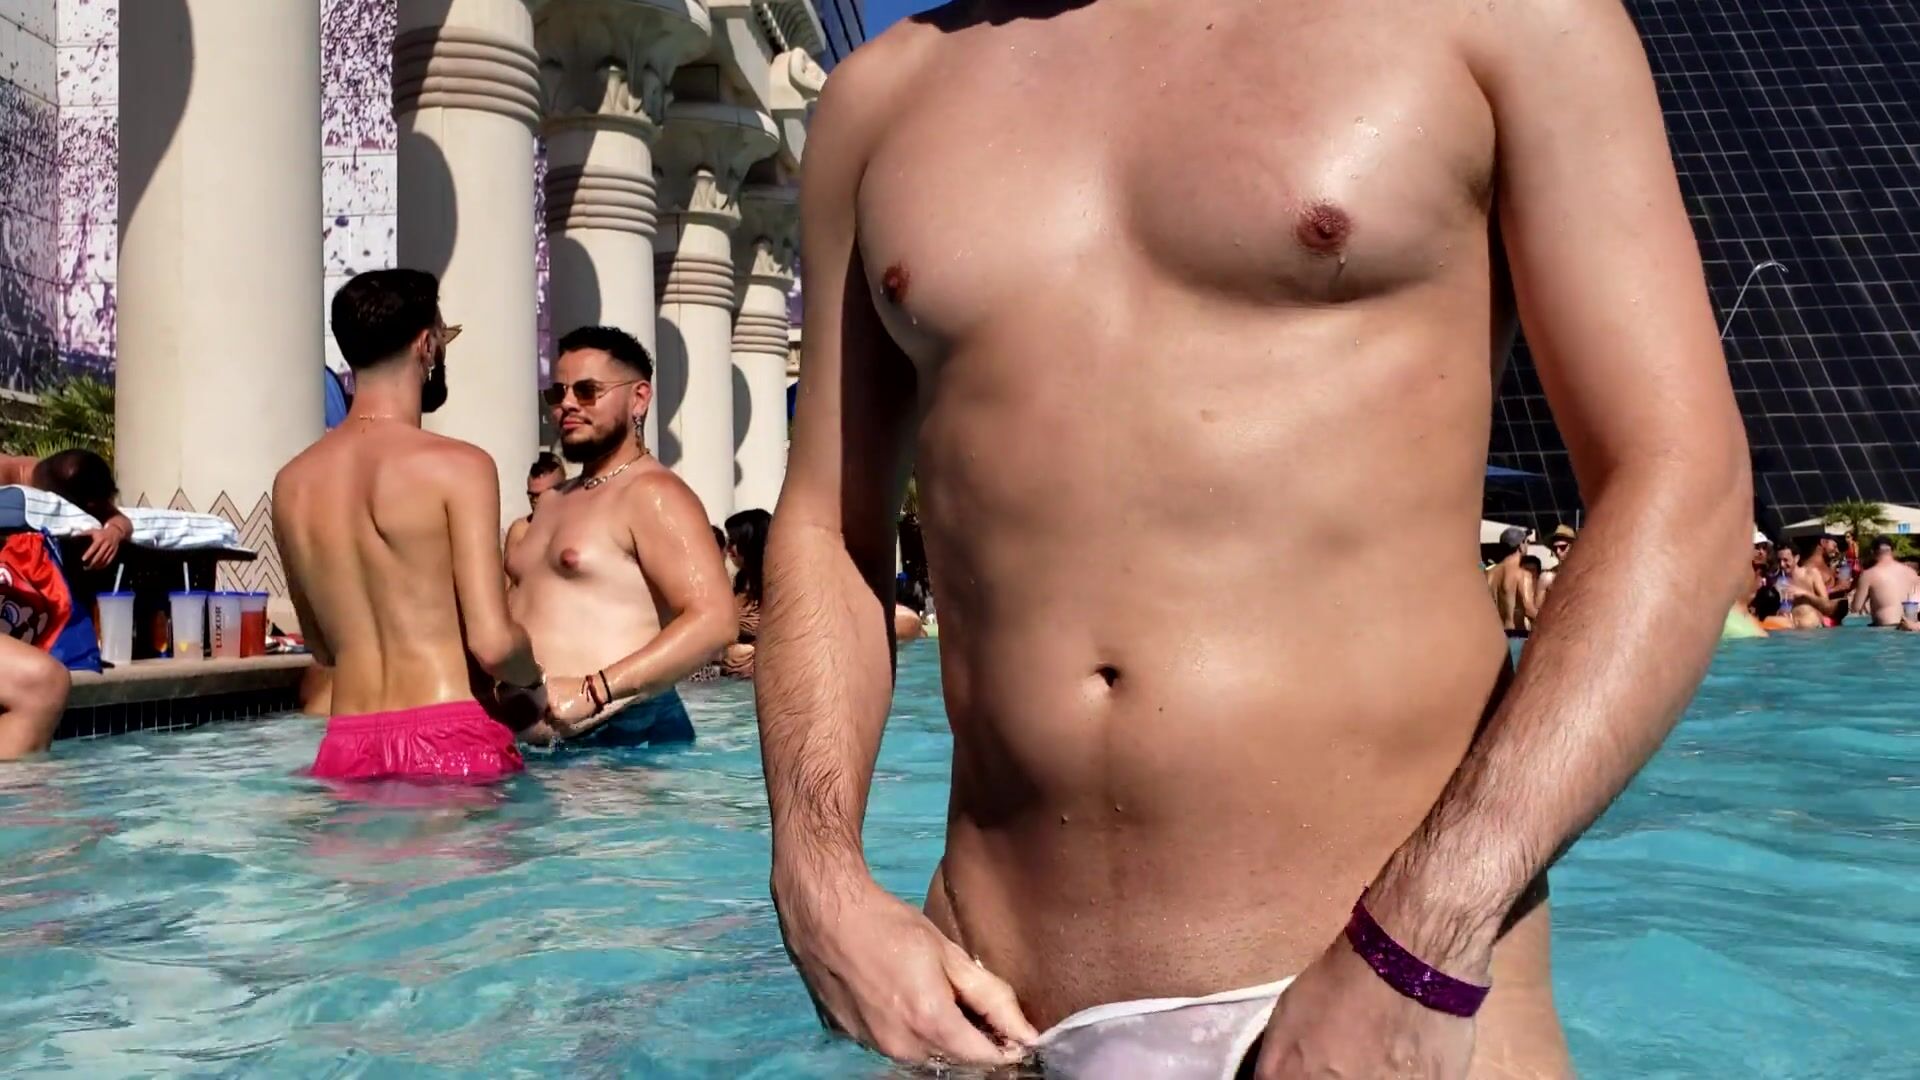 Naked at a public pool and CAUGHT watch online image